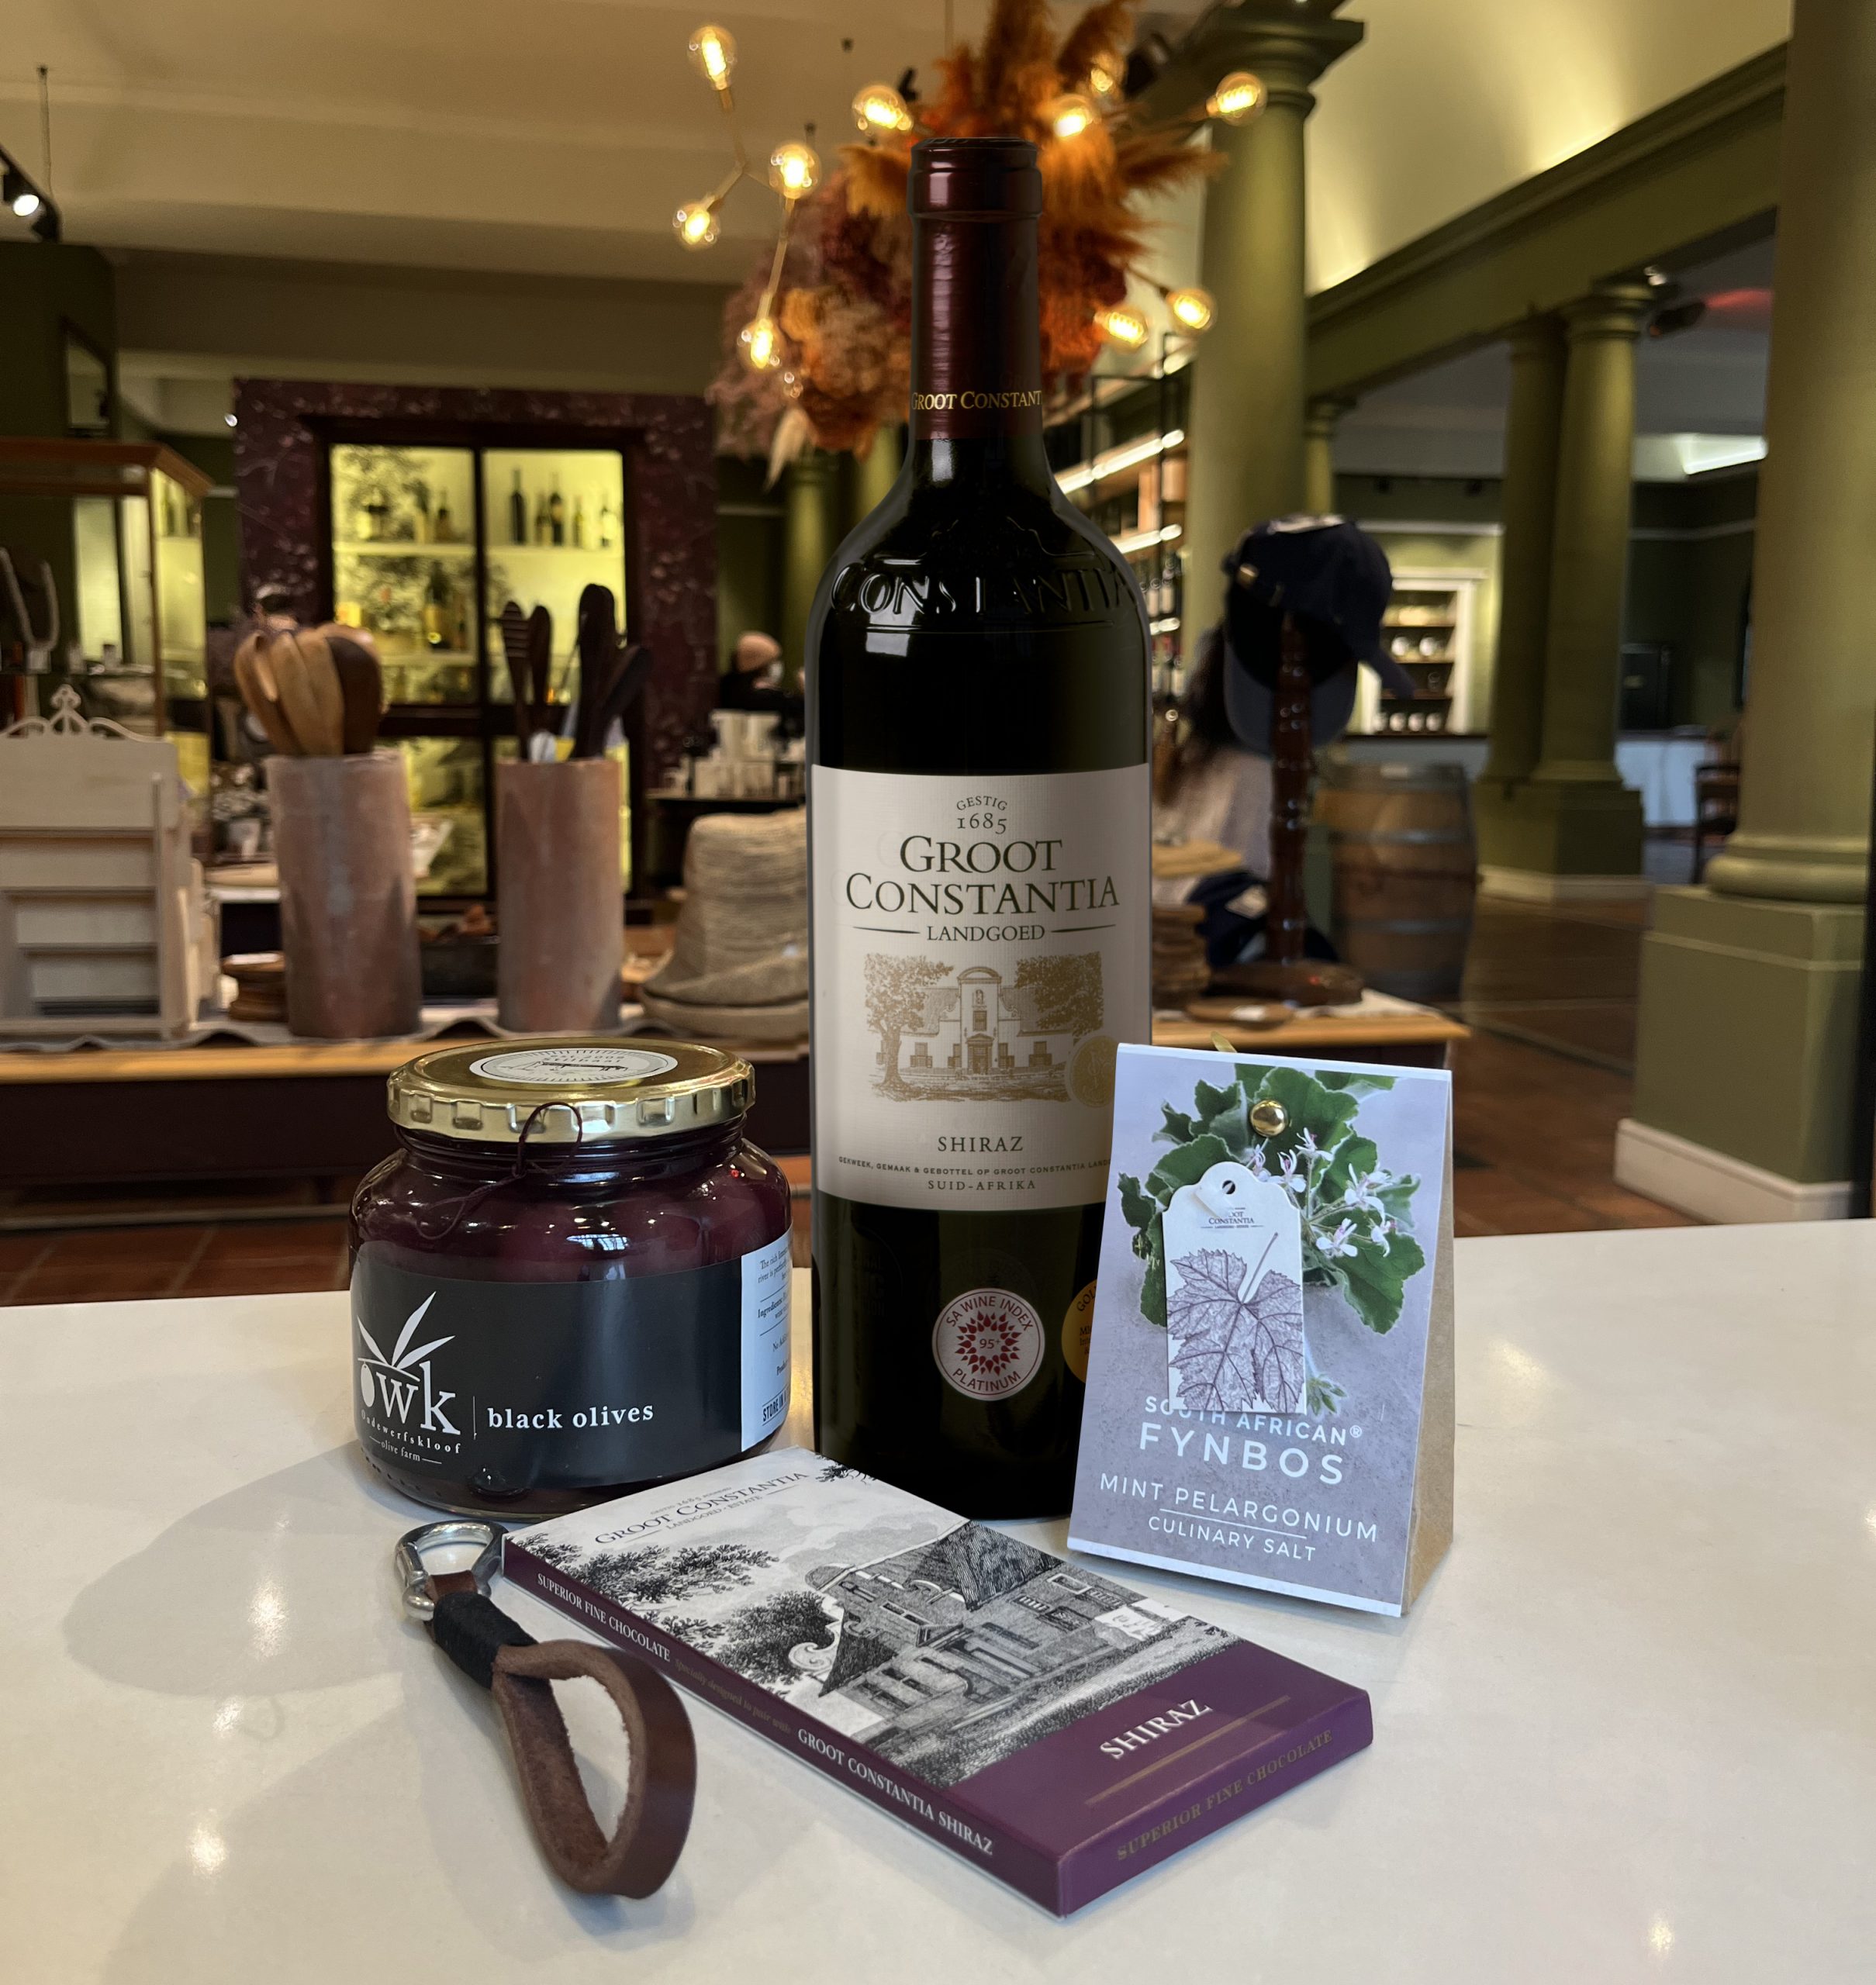 You are currently viewing Celebrate Father’s Day with Groot Constantia’s “At Home” Wine Pairing Experience